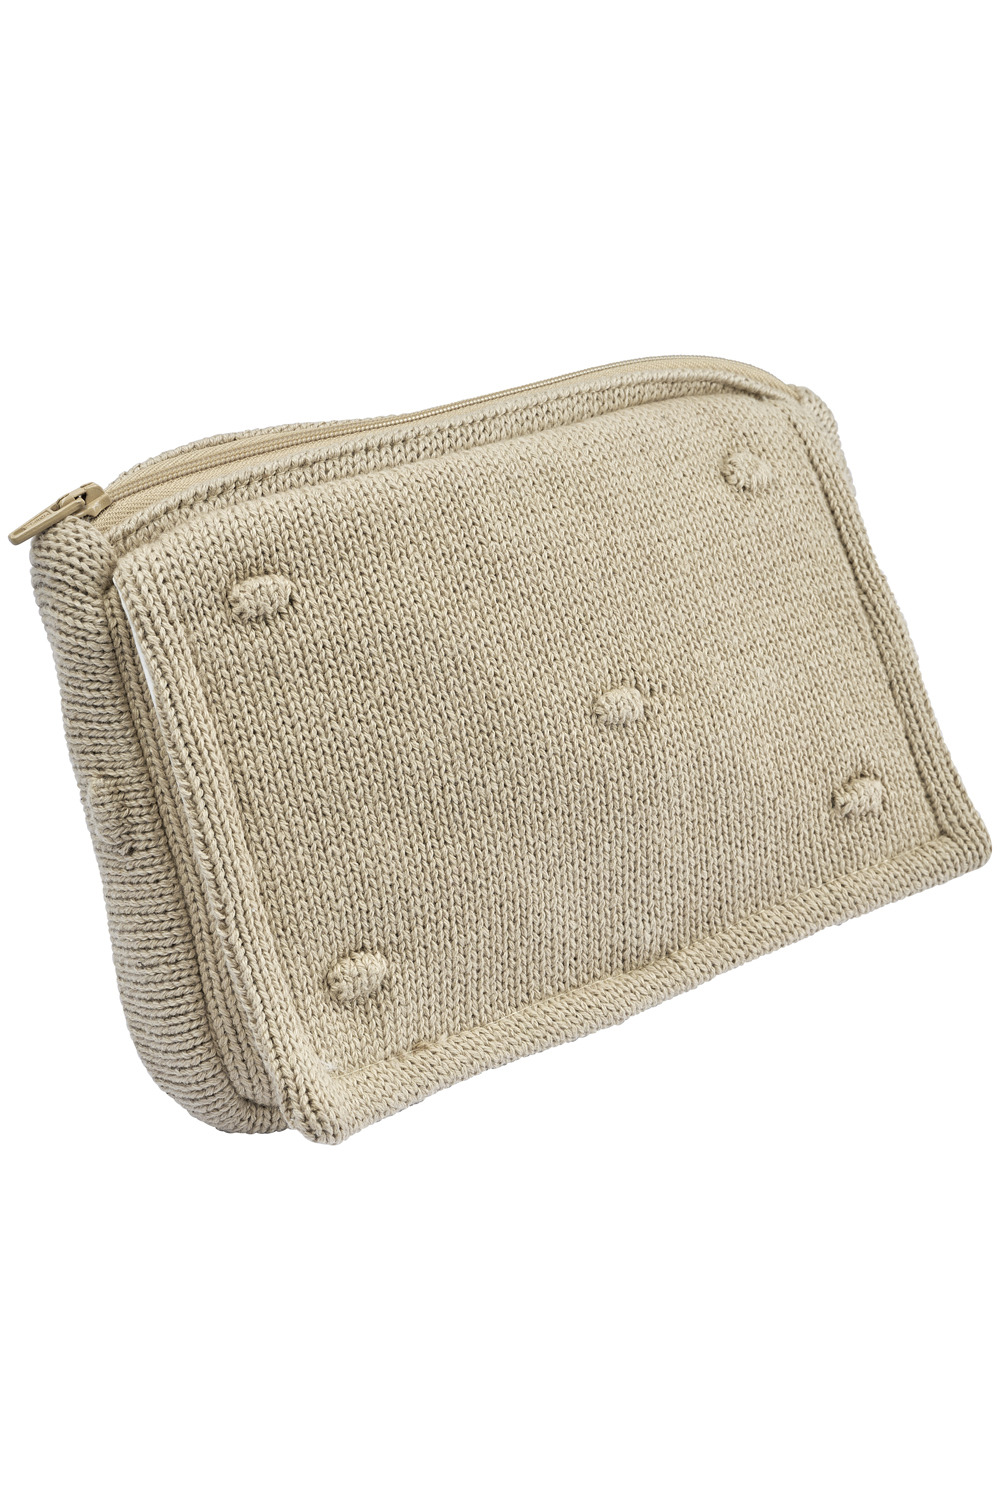 Knitted wipes pouch Mini Knots - Sand 